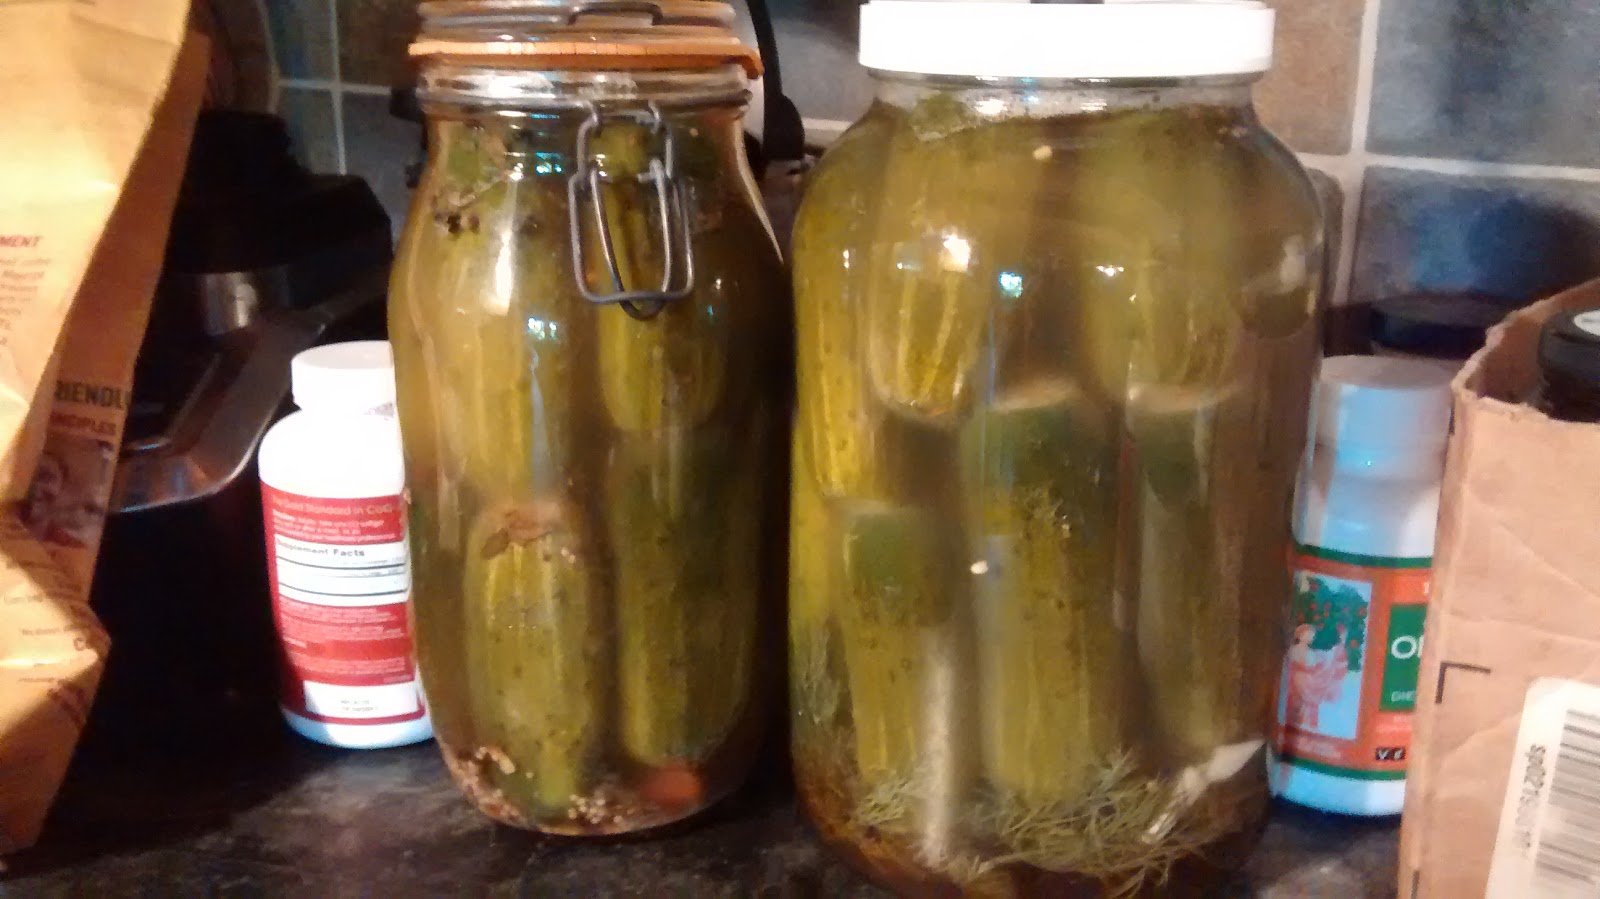 Slow-brined Kosher Dill Pickles Where Can I Buy Block And Barrel Pickles